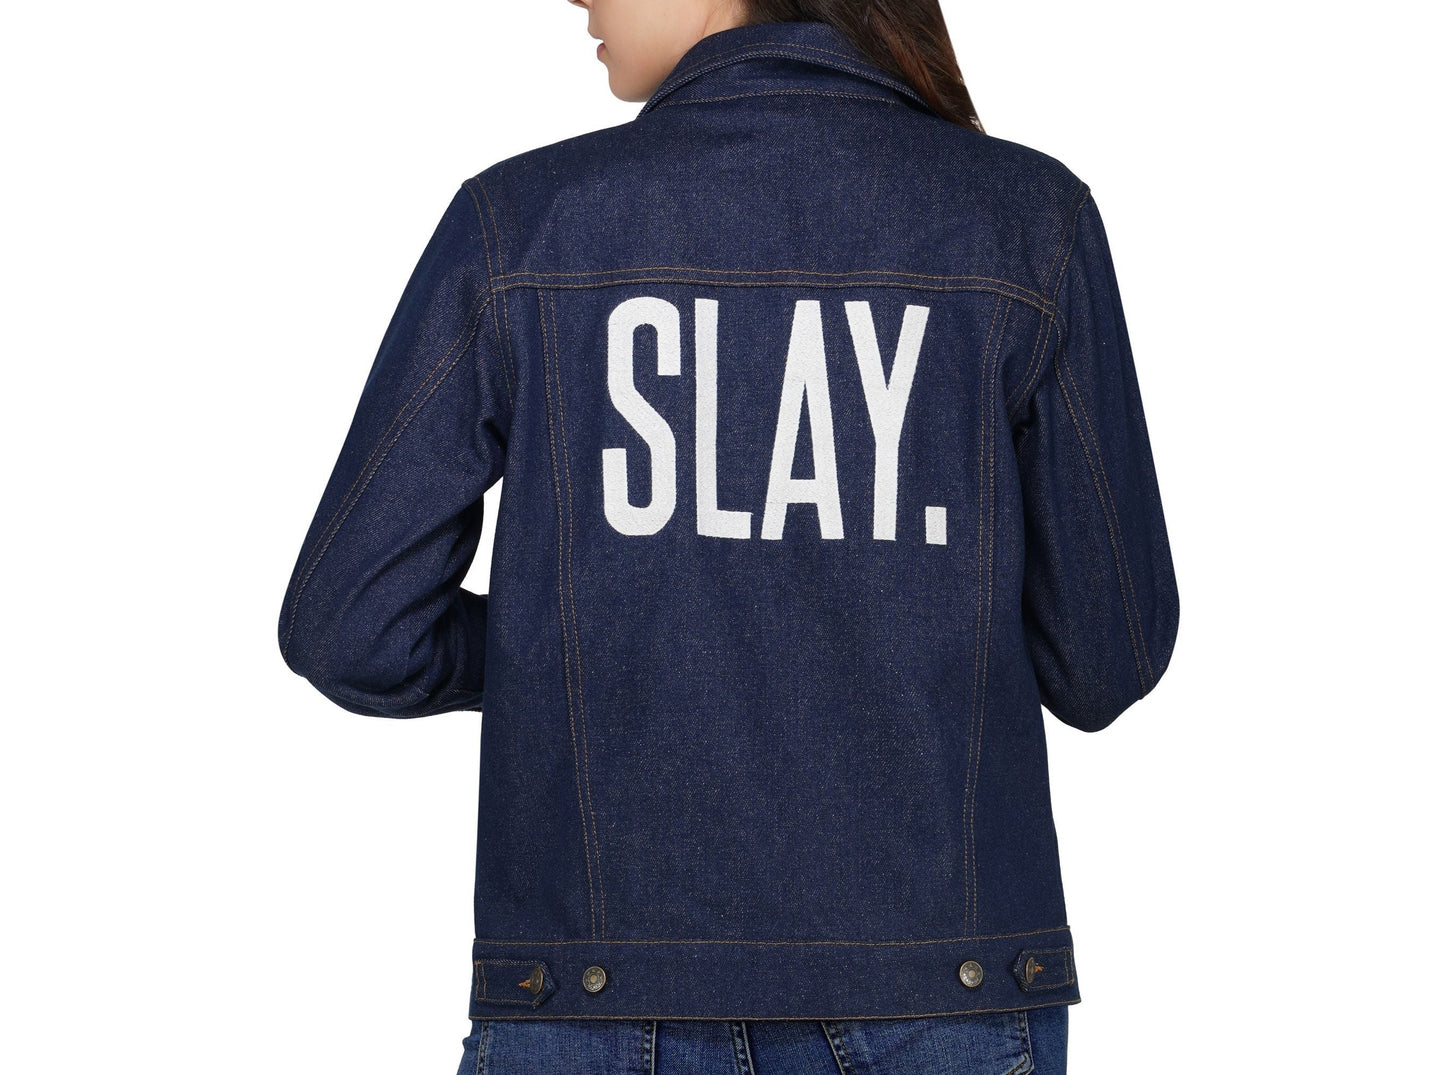 SLAY. Embroidered Women's Denim Navy Blue Jacket with Faux-fur Lining